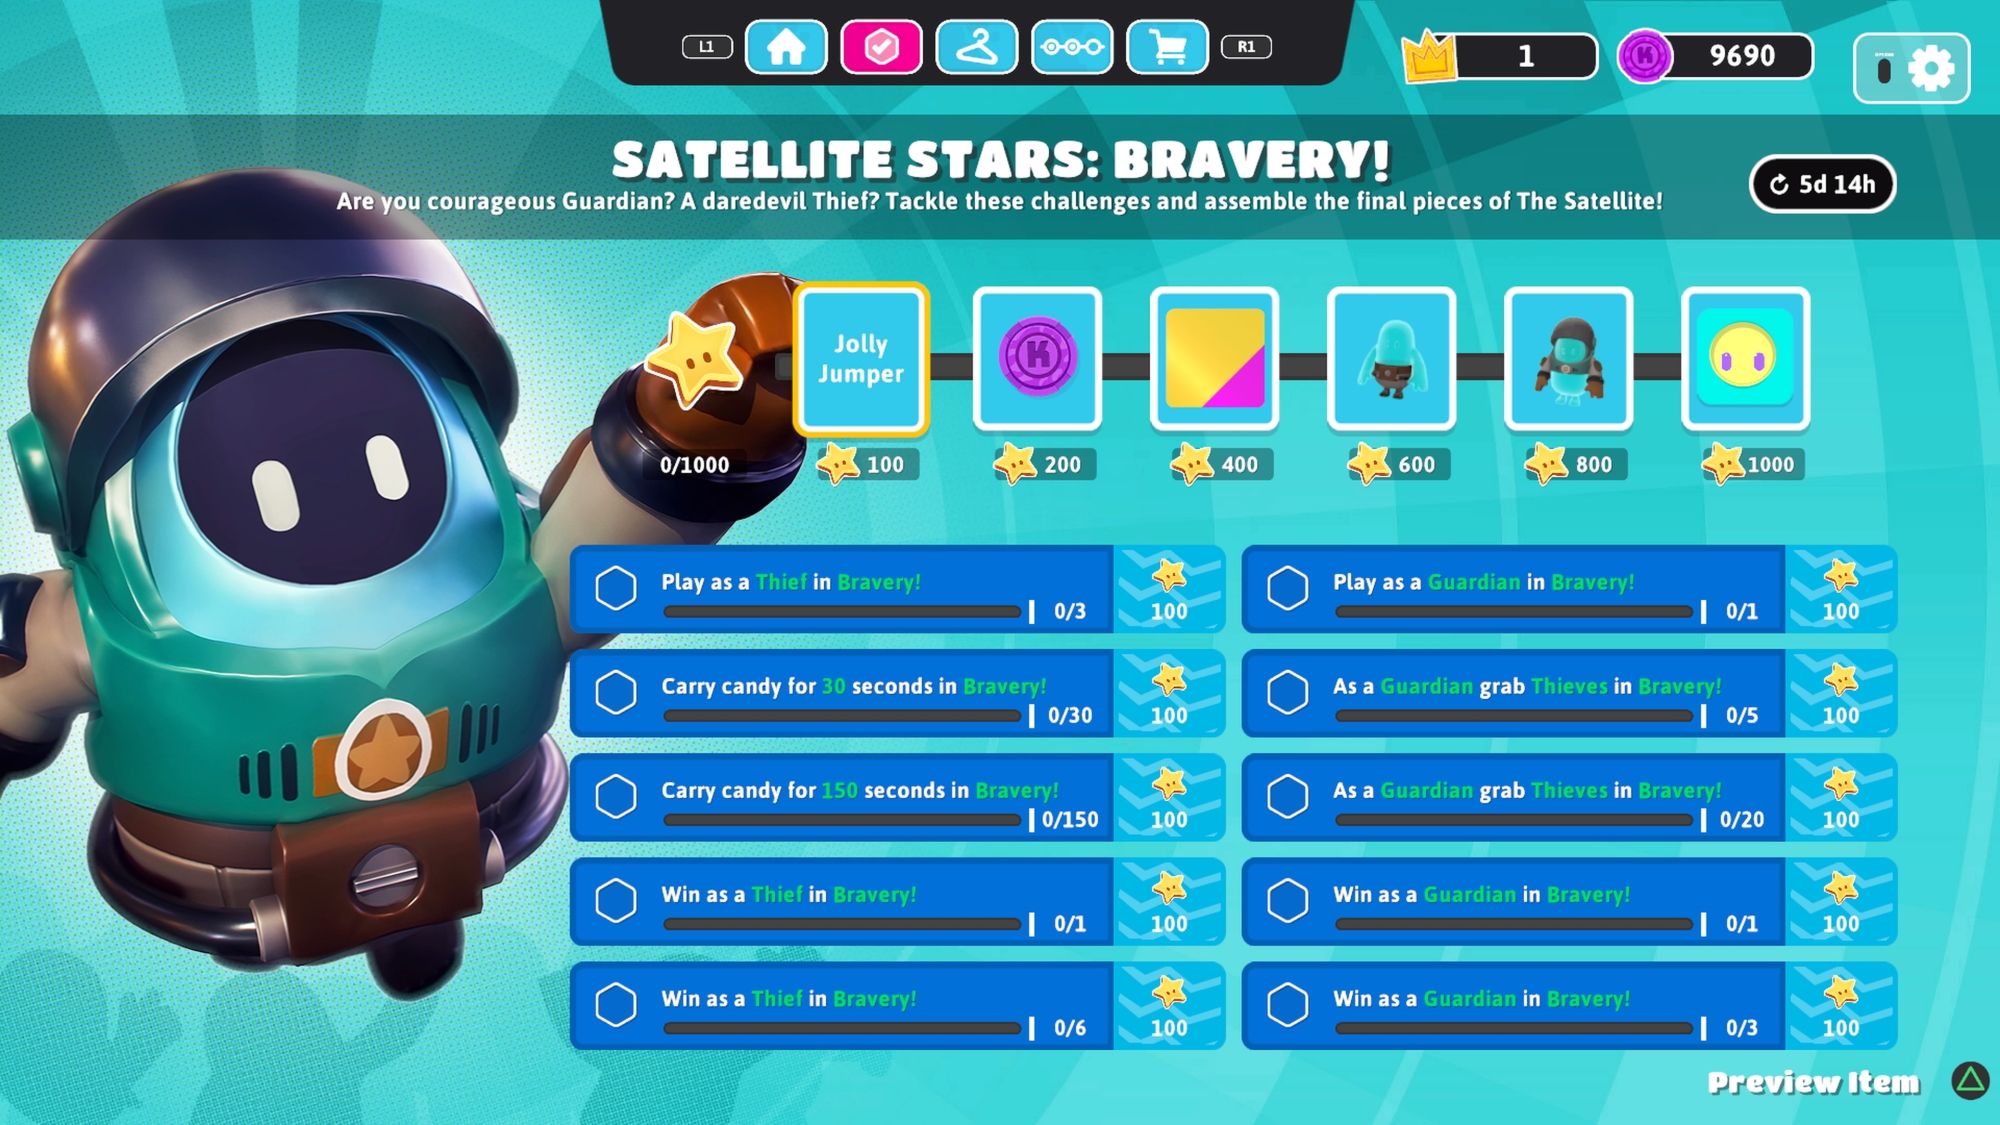 Satellite Stars Bravery Event Challenges and Rewards from Fall Guys